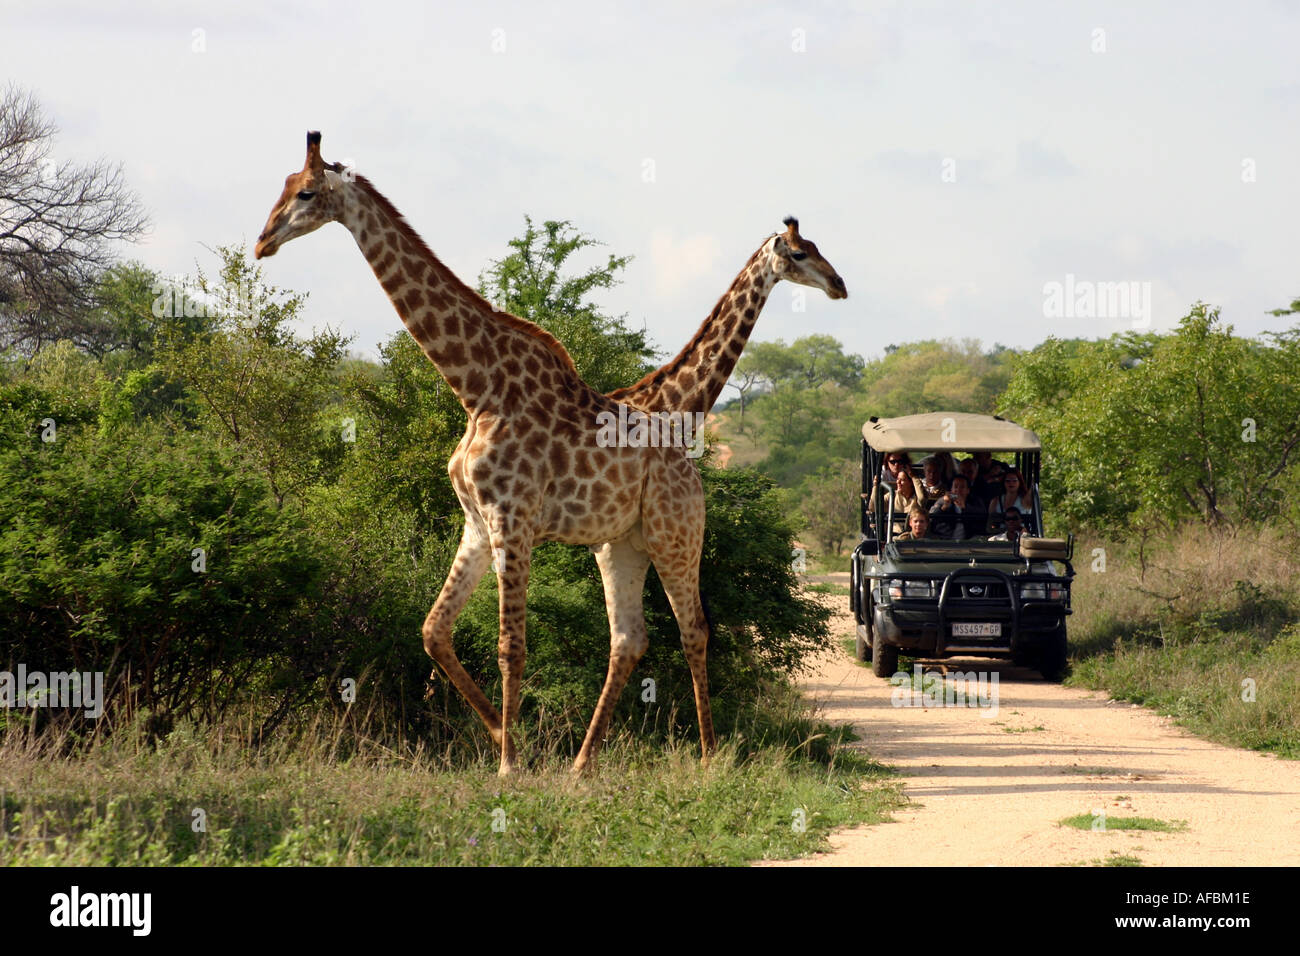 Two giraffes and safari truck on safari in southern Africa South Africa Stock Photo